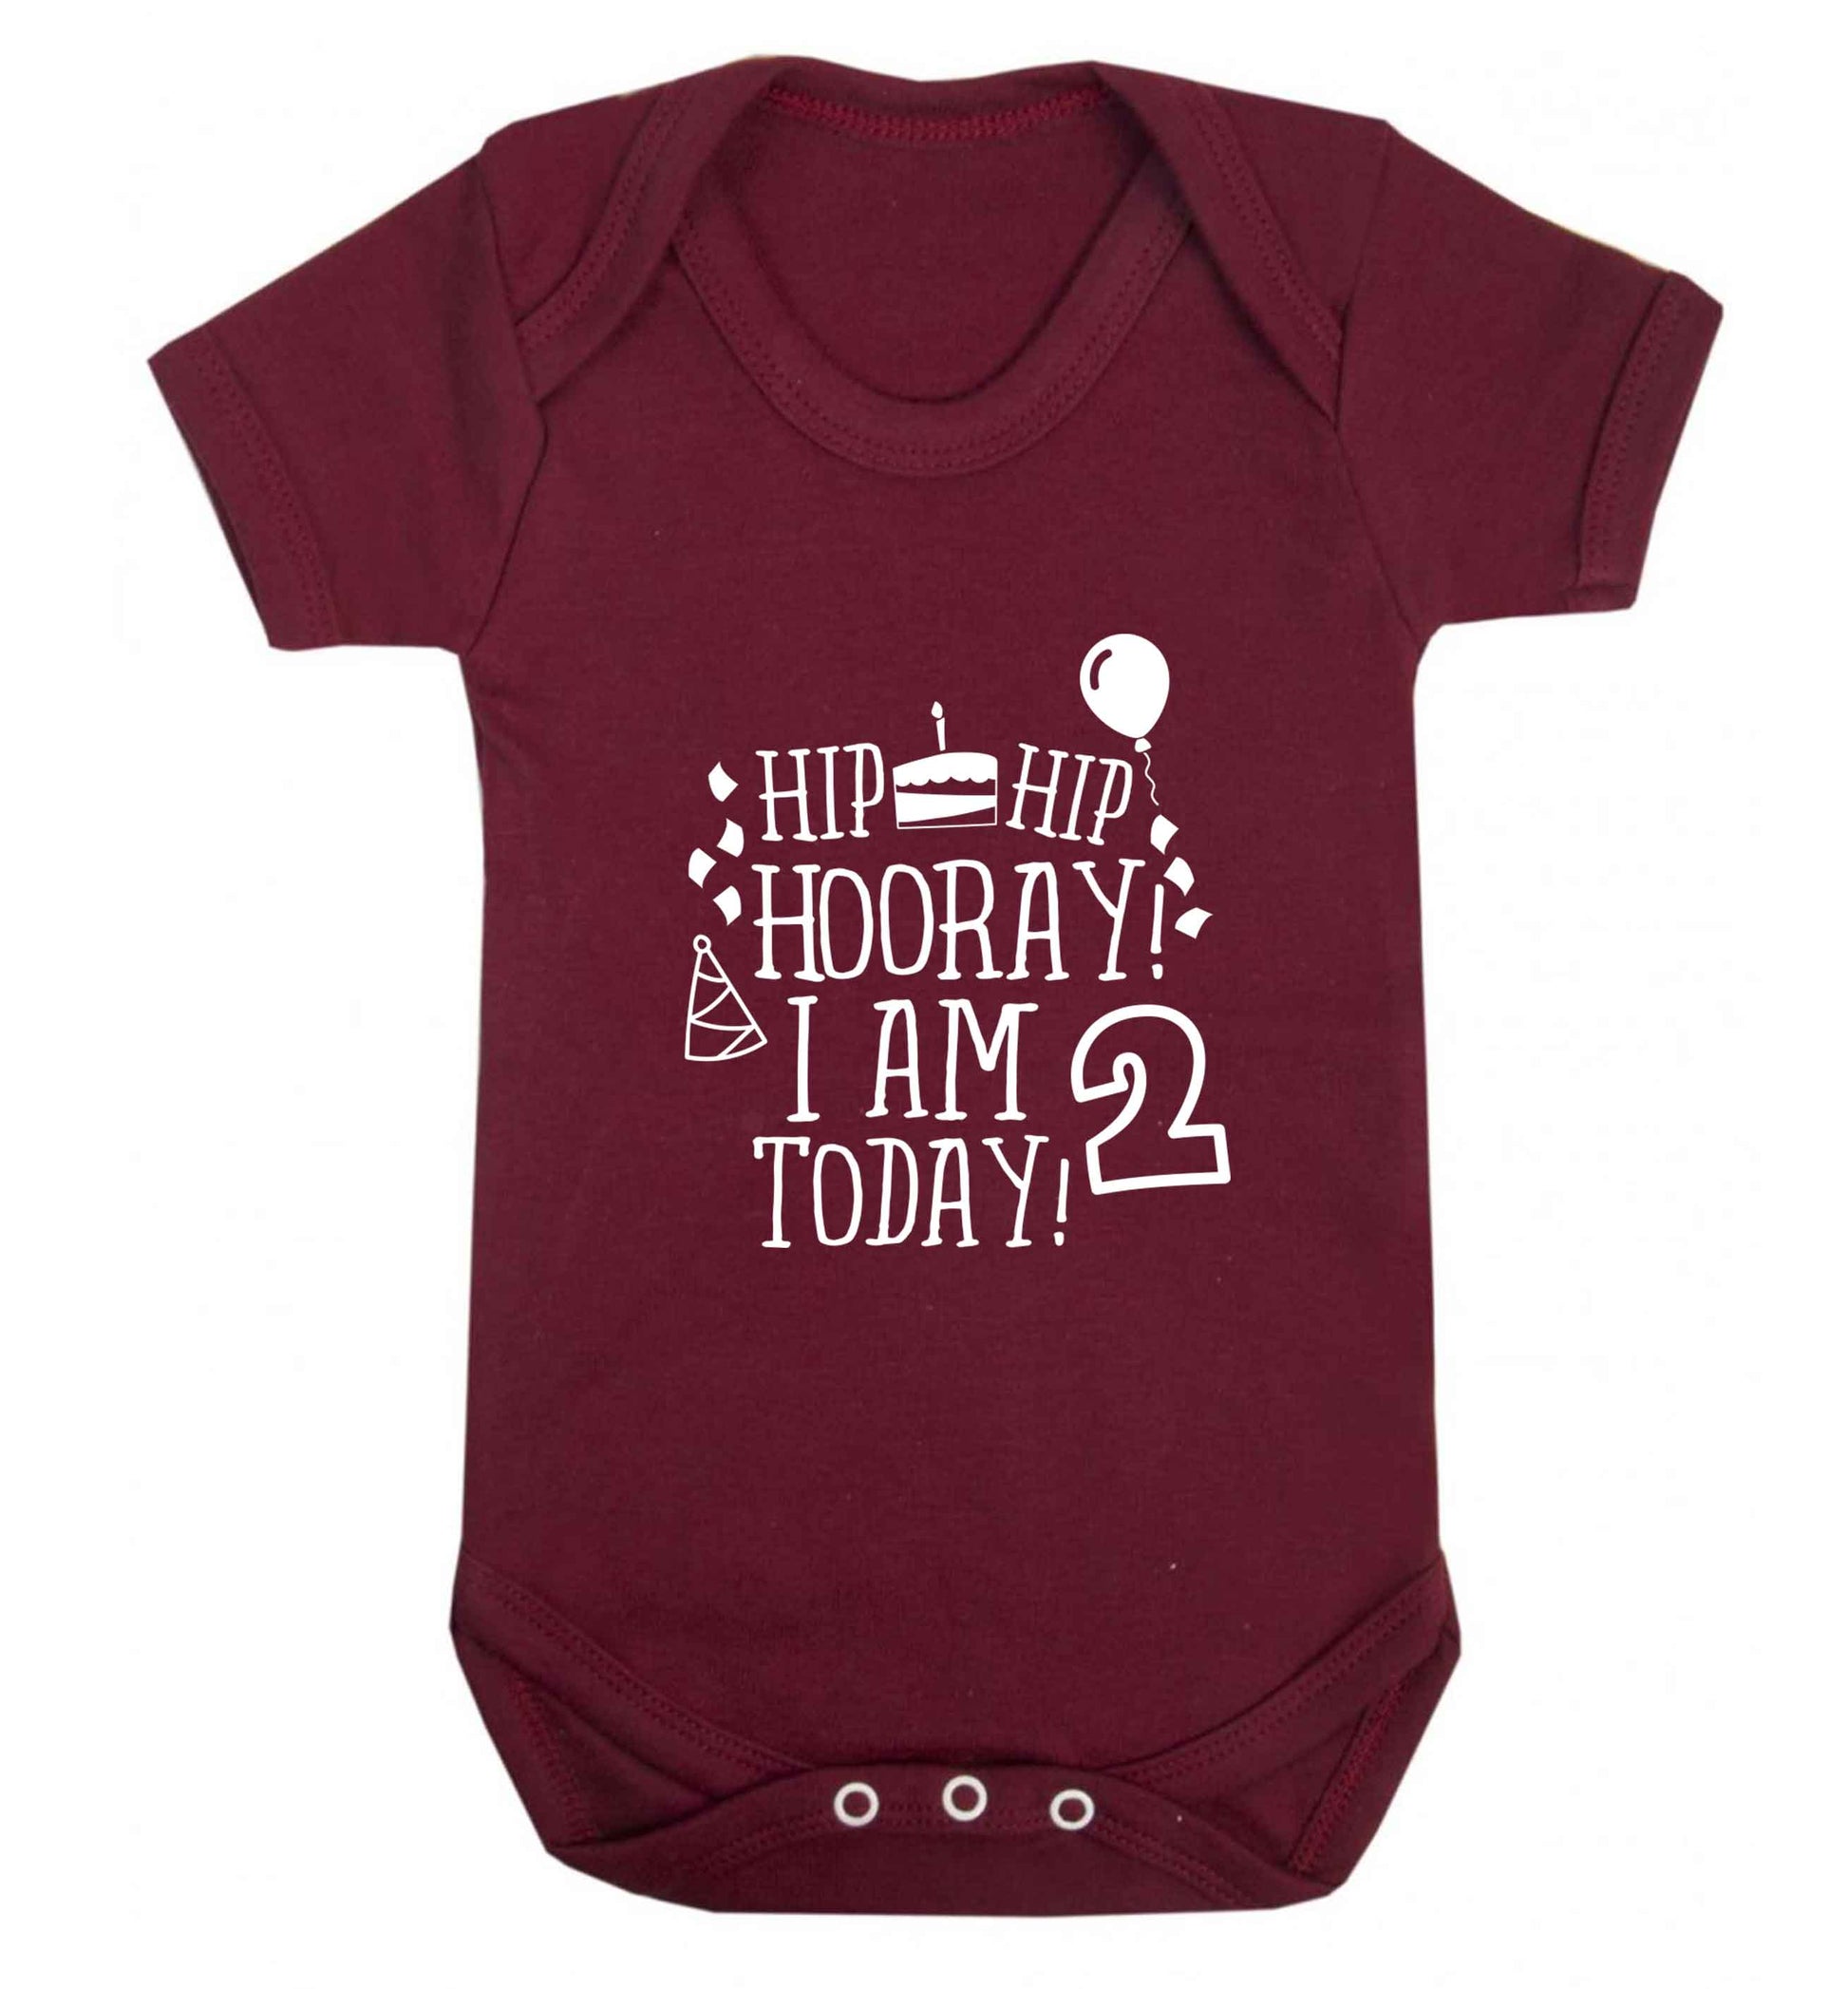 I'm 2 Today baby vest maroon 18-24 months